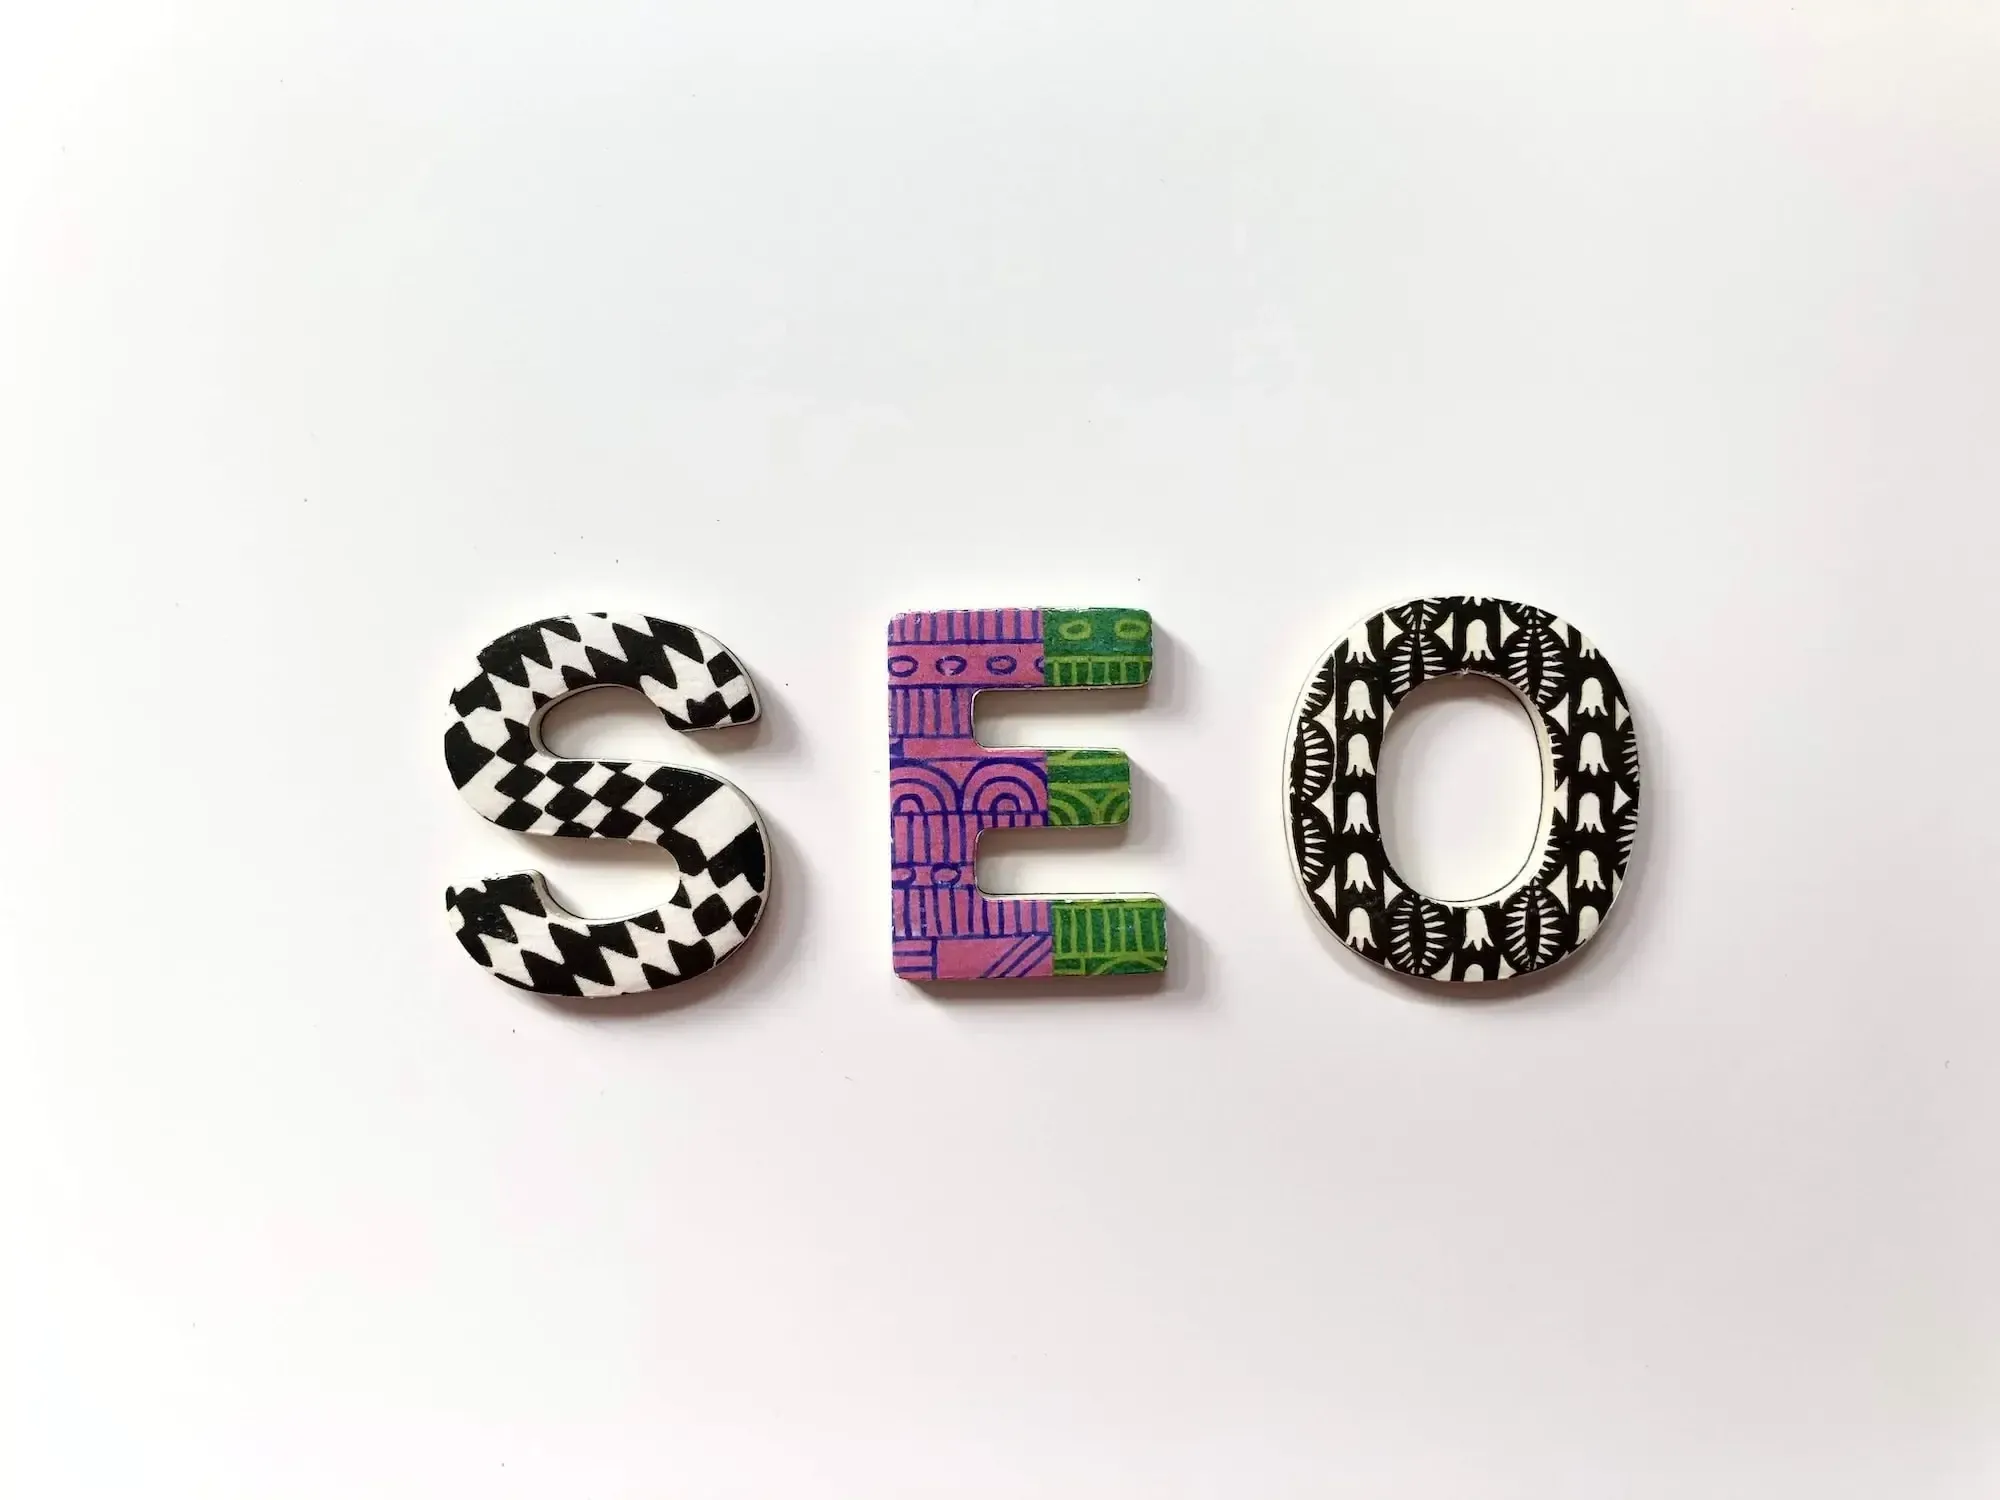 White background, three letters with different patterns and colors spelling "SEO".